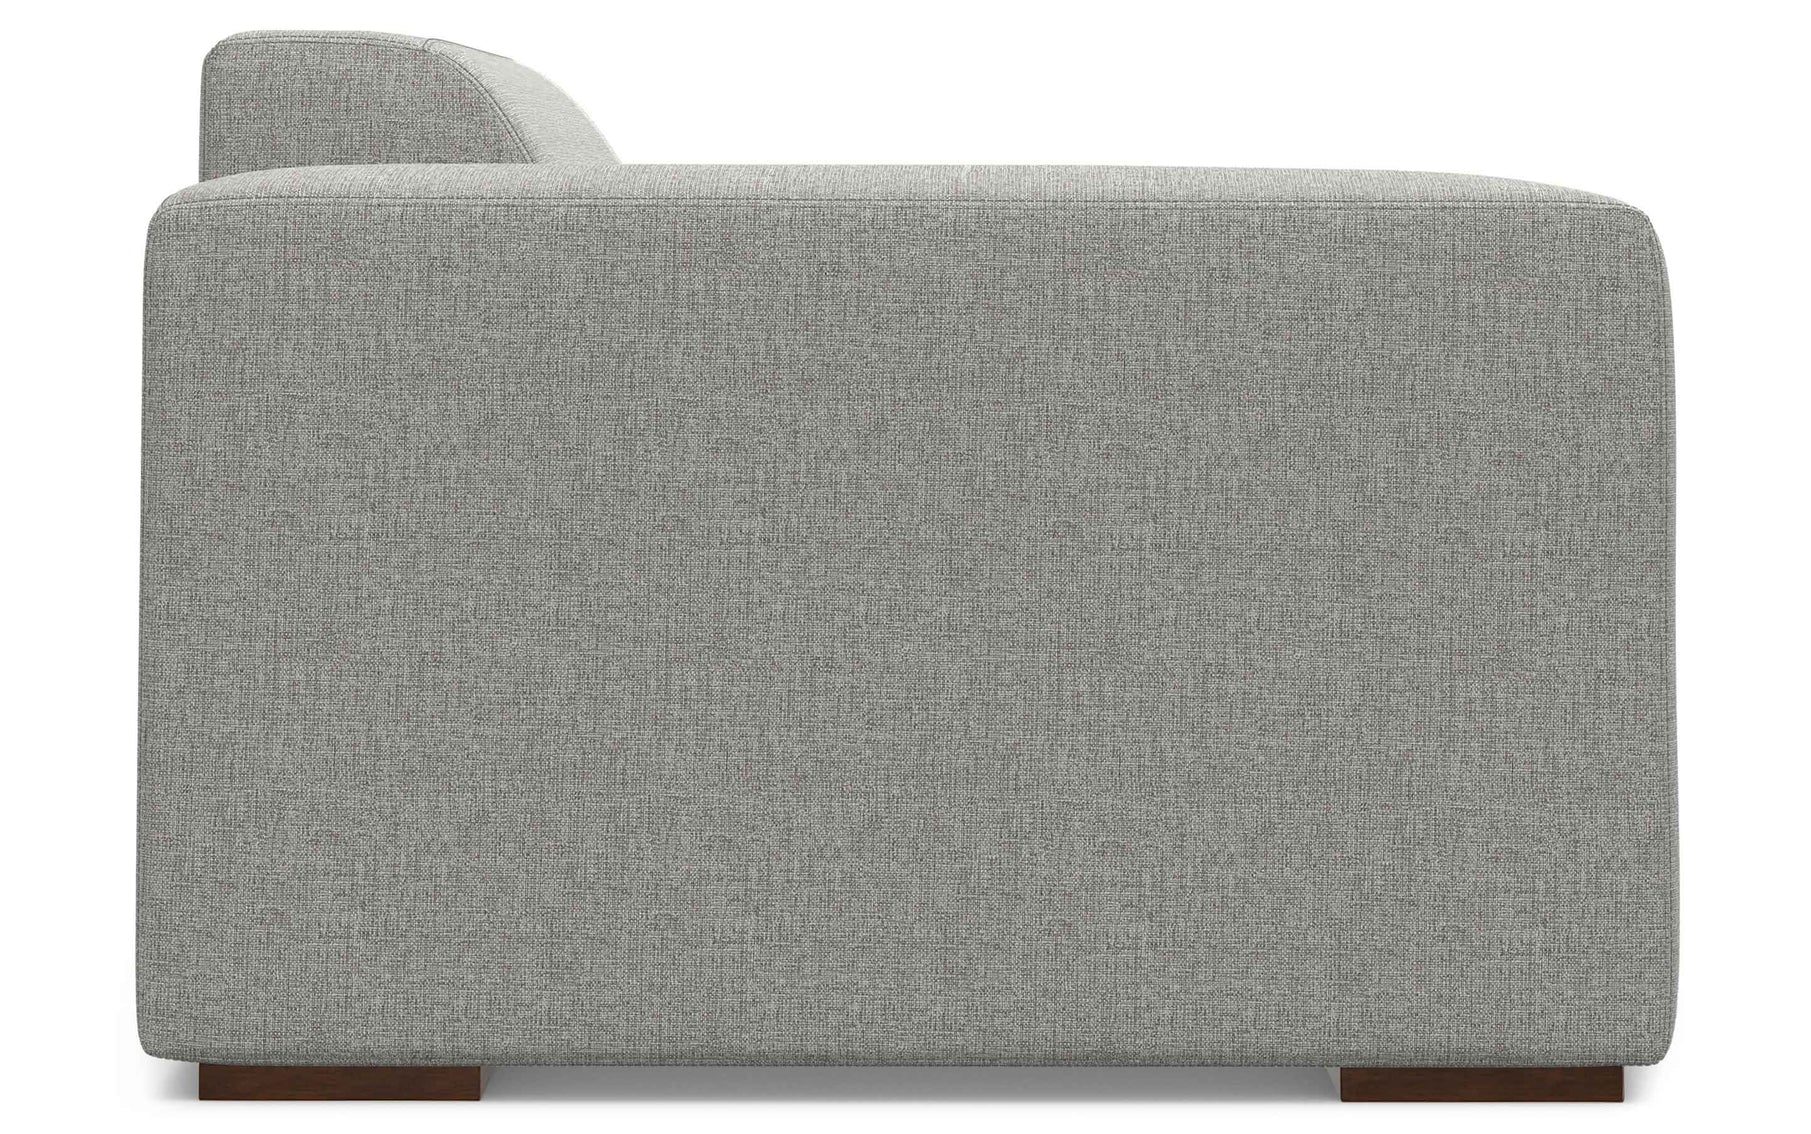 Pale Grey Performance Fabric | Rex 2 Seater Sofa in Performance Fabric